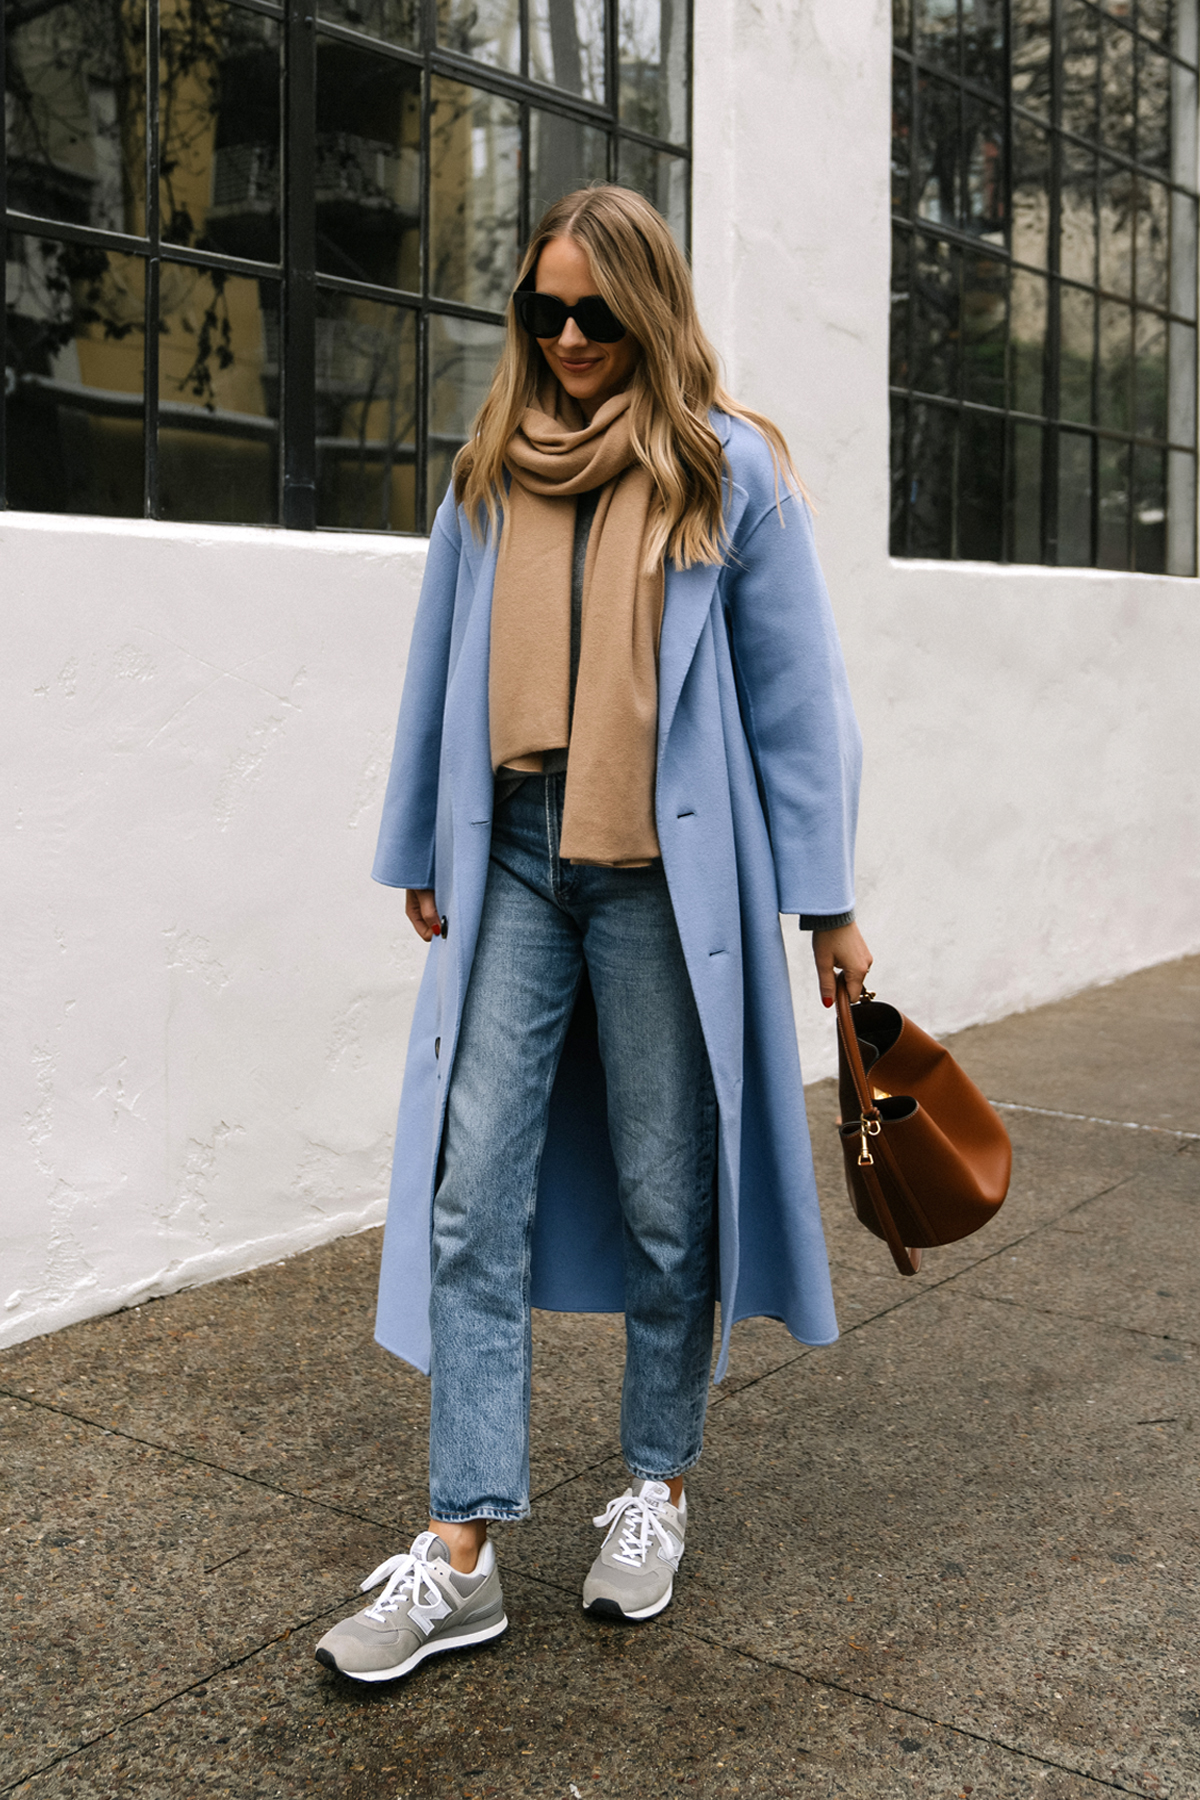 Fashion Jackson Wearing Loulou Studio Borneo Womens Blue Coat Camel Scarf AGOLDE Jeans Celine Bucket 16 Bag Winter Coat and Sneakers Outfits with New Balance 574 Street Style 2